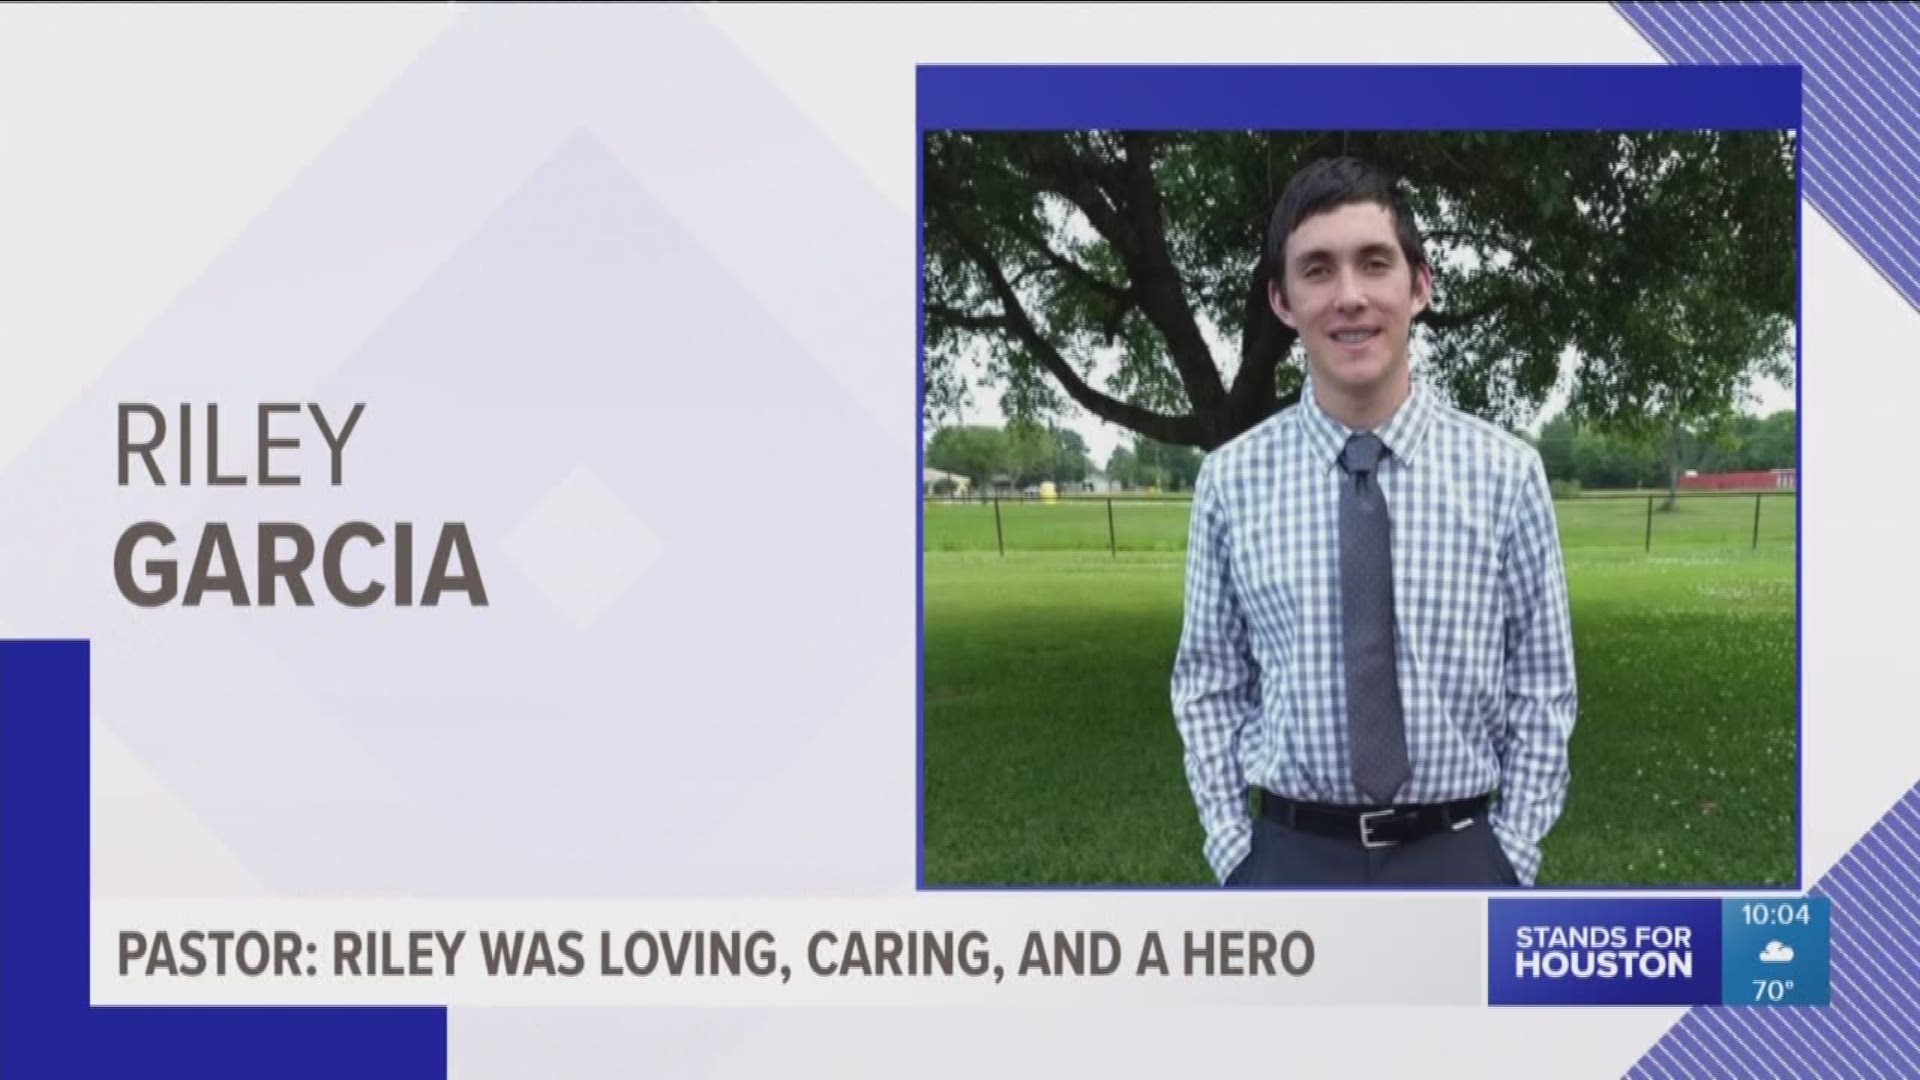 Riley Garcia's pastor said Riley died a true hero. He says Riley held the classroom door shut and let other kids run to safety before he got shot.